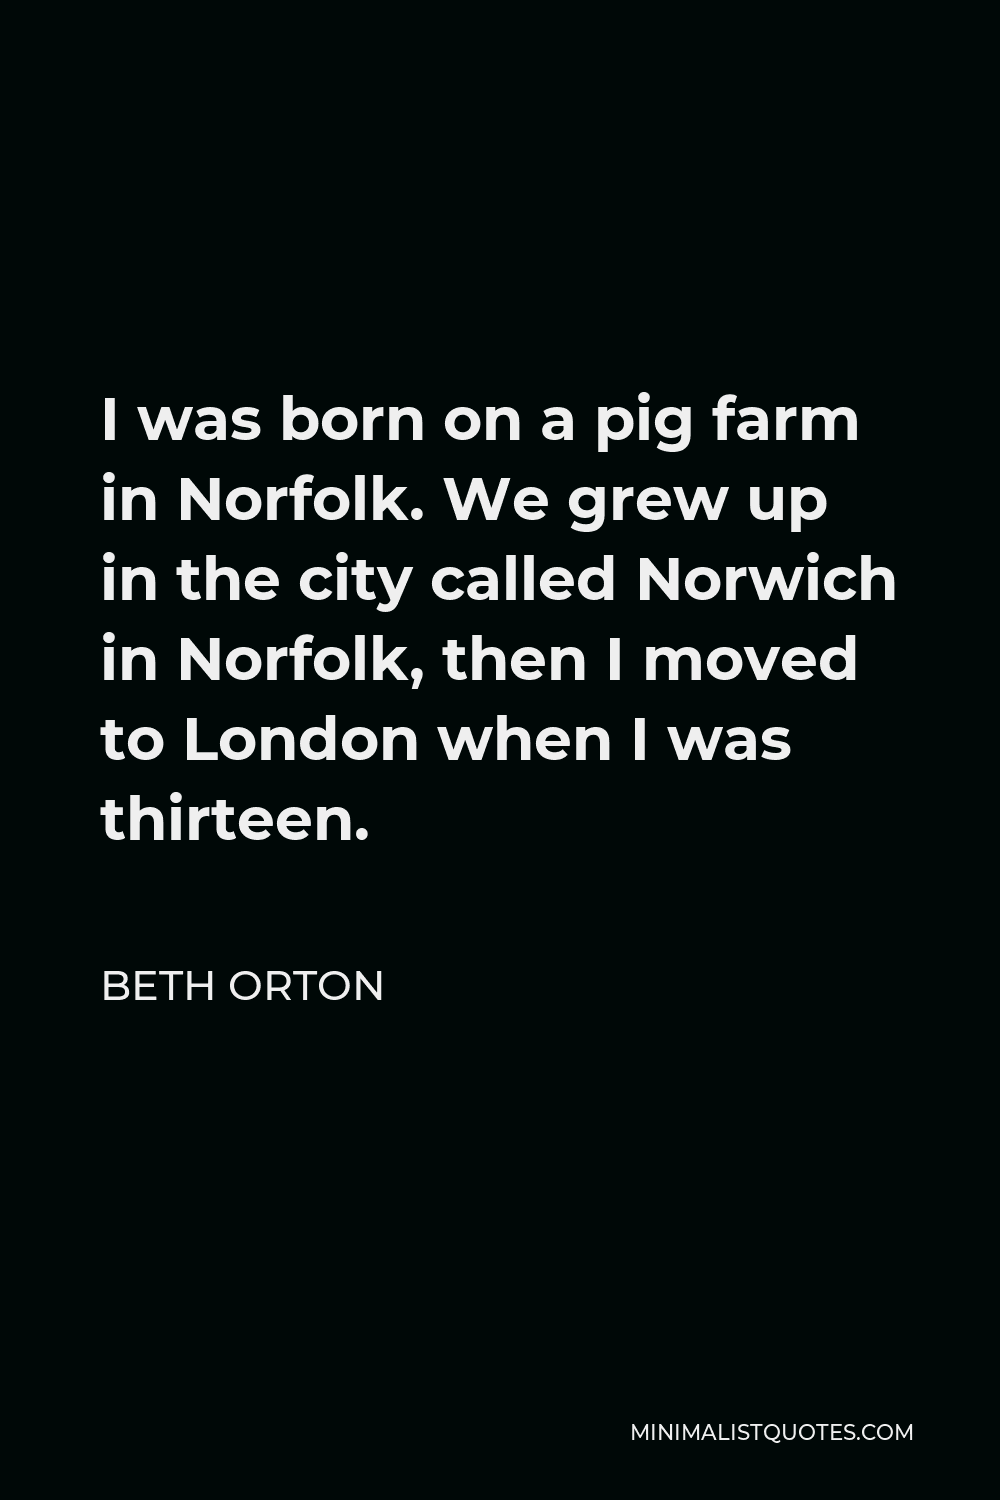 Beth Orton Quote - I was born on a pig farm in Norfolk. We grew up in the city called Norwich in Norfolk, then I moved to London when I was thirteen.